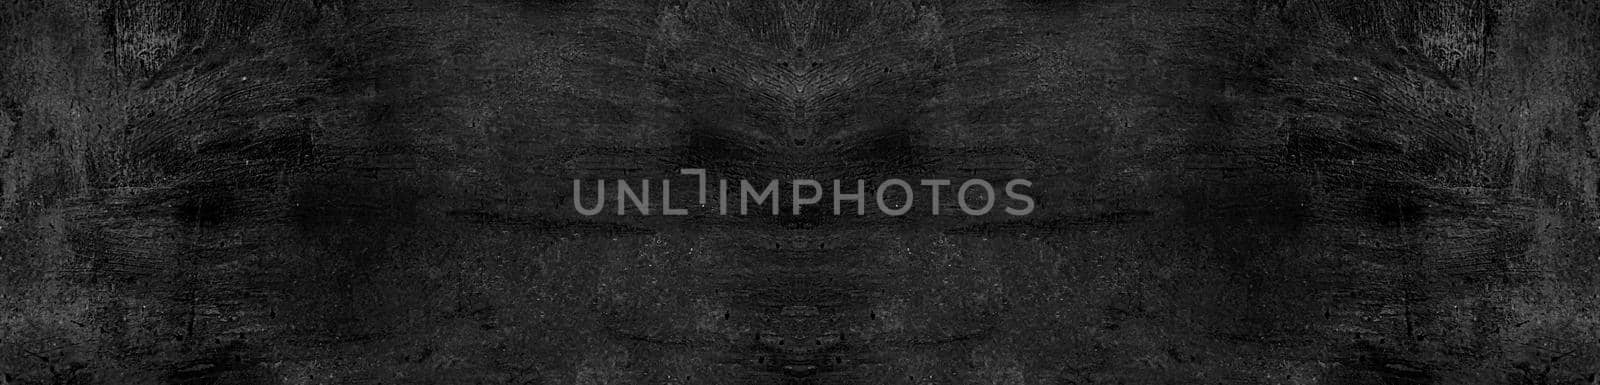 Vintage or grungy black background of natural cement or stone old texture as a retro pattern wall. It is a concept, conceptual or metaphor wall banner, grunge, material, aged, rust or construction.